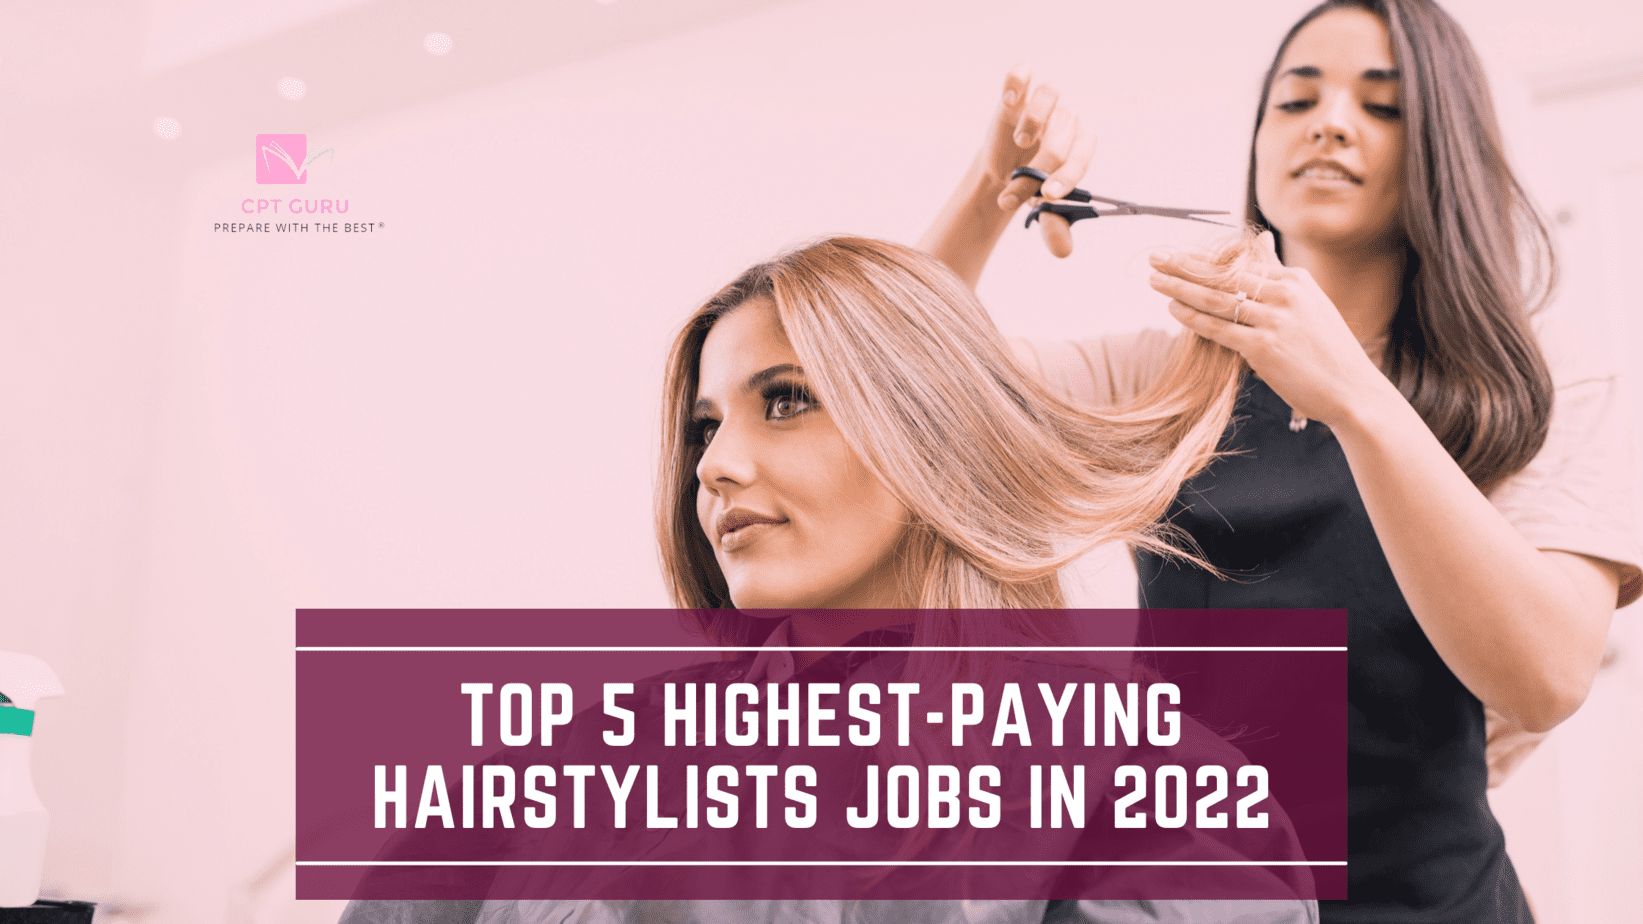 The 5 Highest-Paying Hairstylists Jobs in 2022